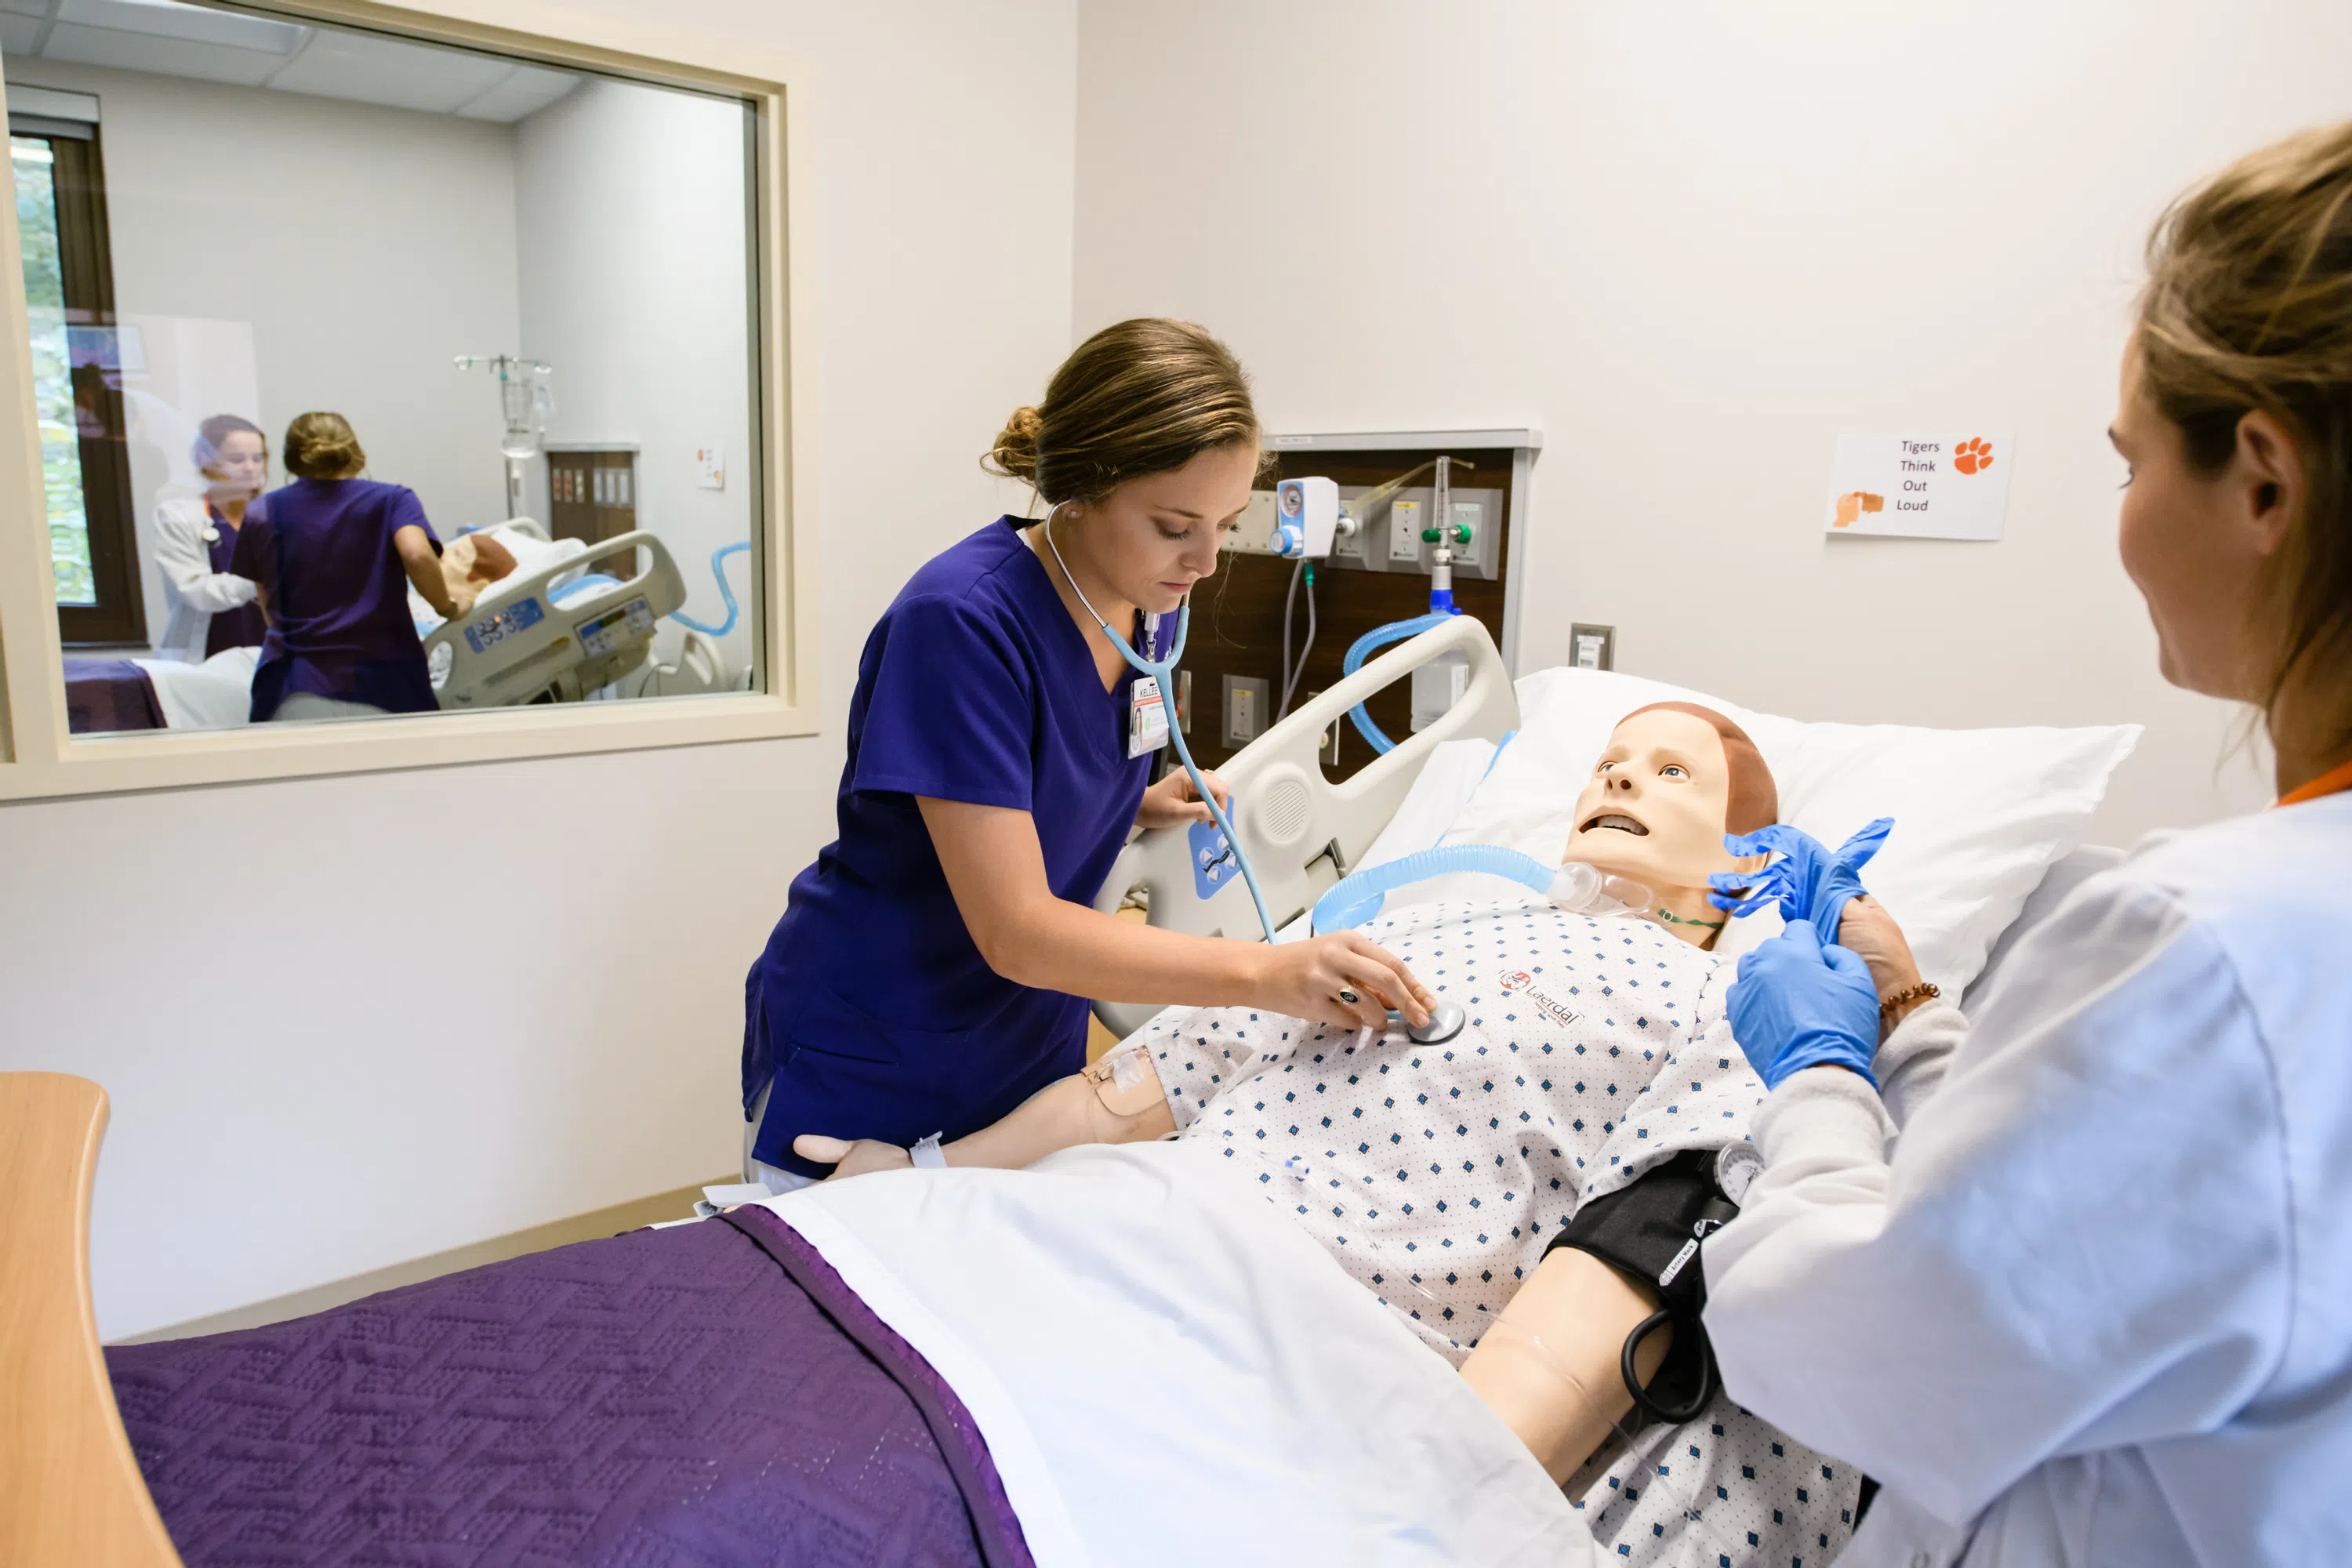 A Nursing student works with a fake patient in the Nursing Simulation Lab in Edwards Hall.